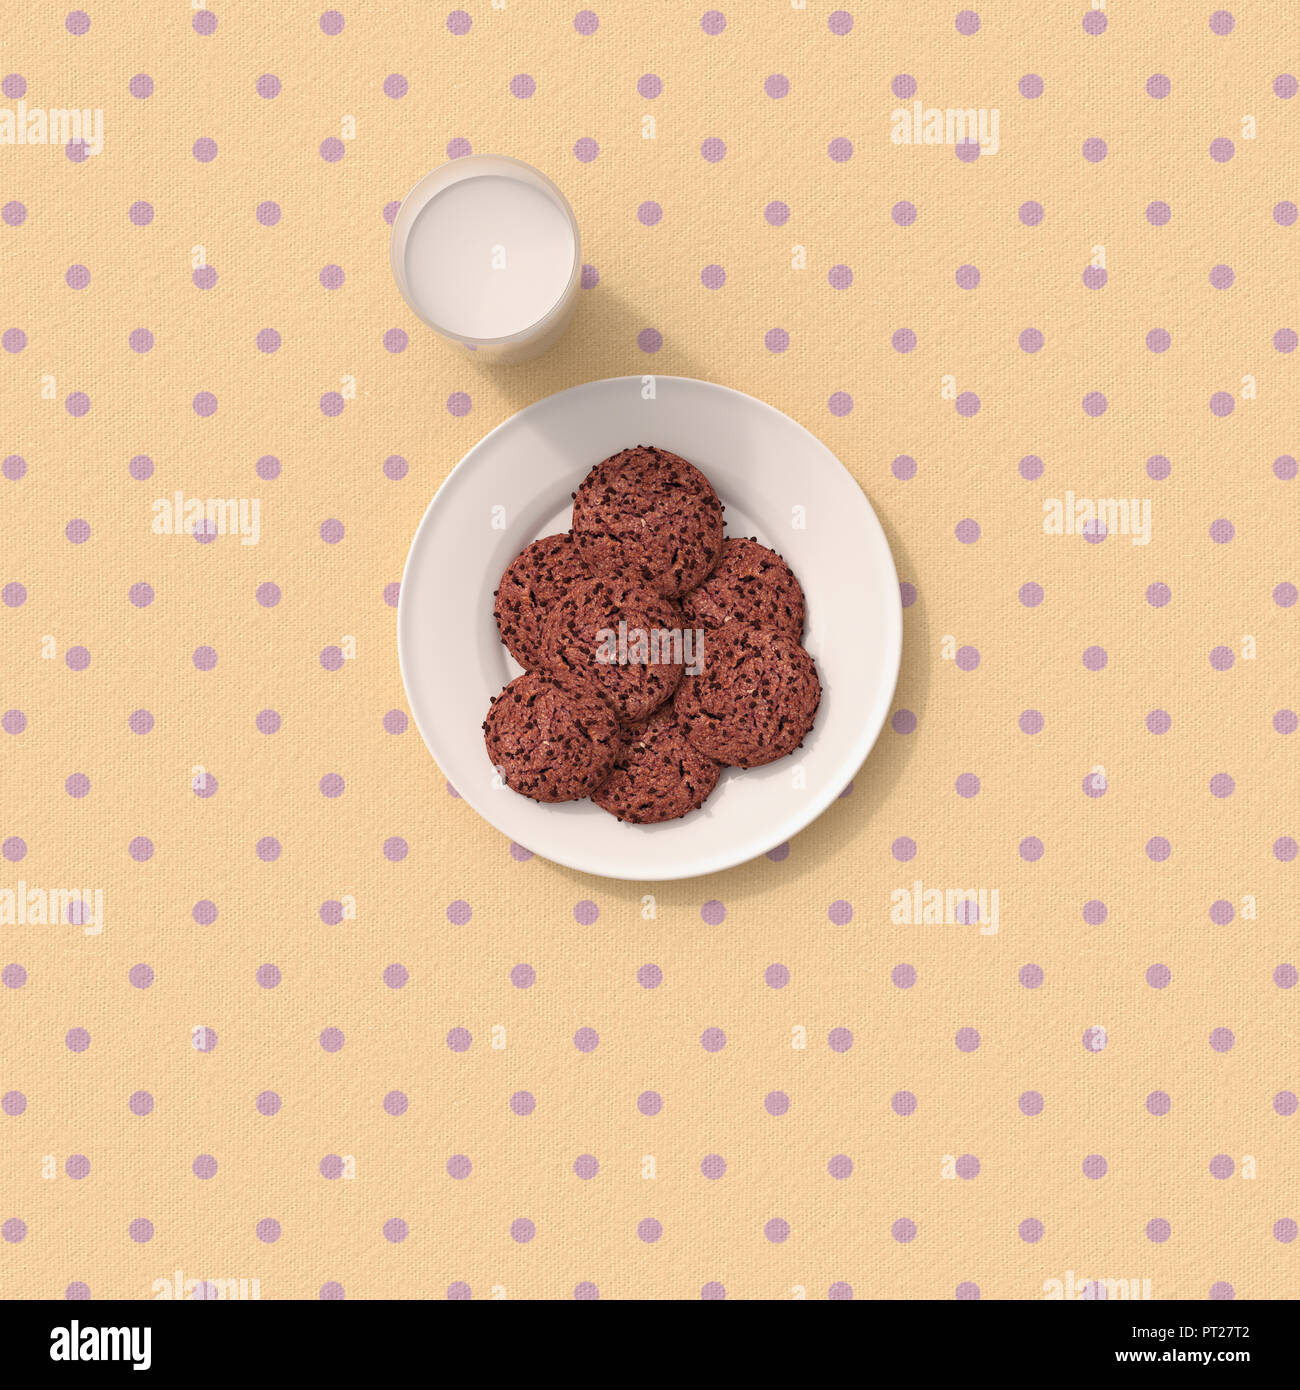 3D rendering, Chocolate cookies on table cloth with polka dots Stock Photo